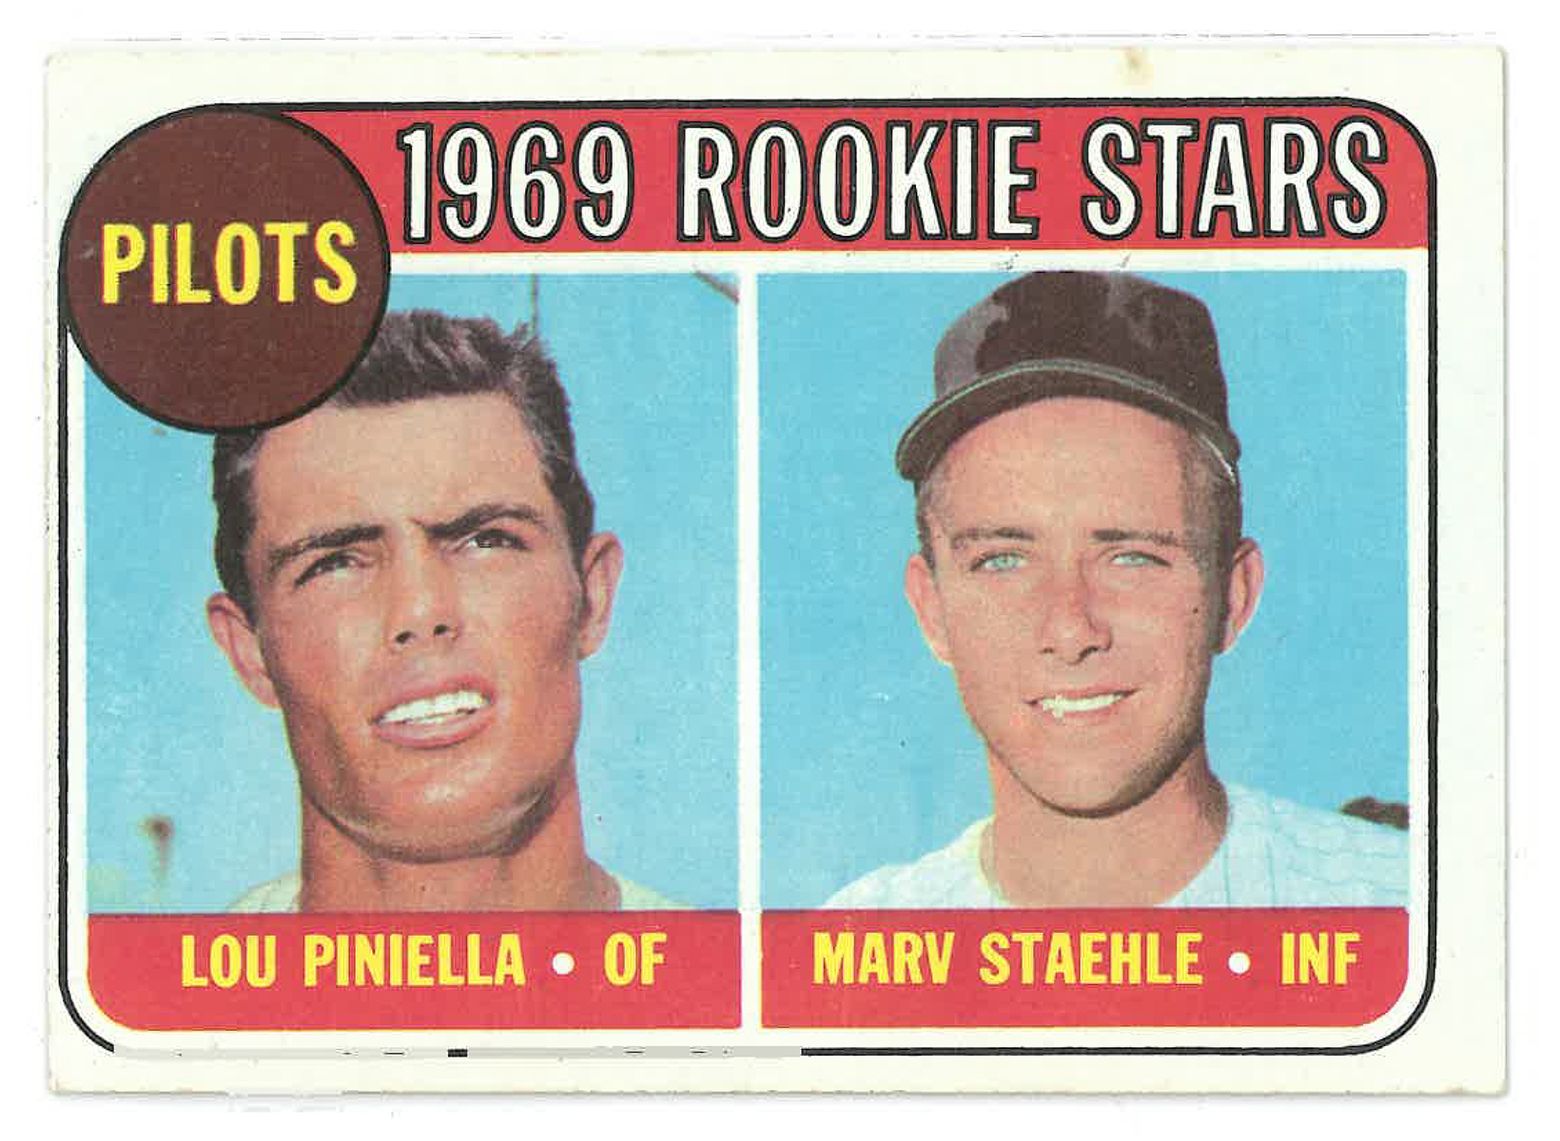 The 1969 Pilots were a bad baseball team but a fascinating story